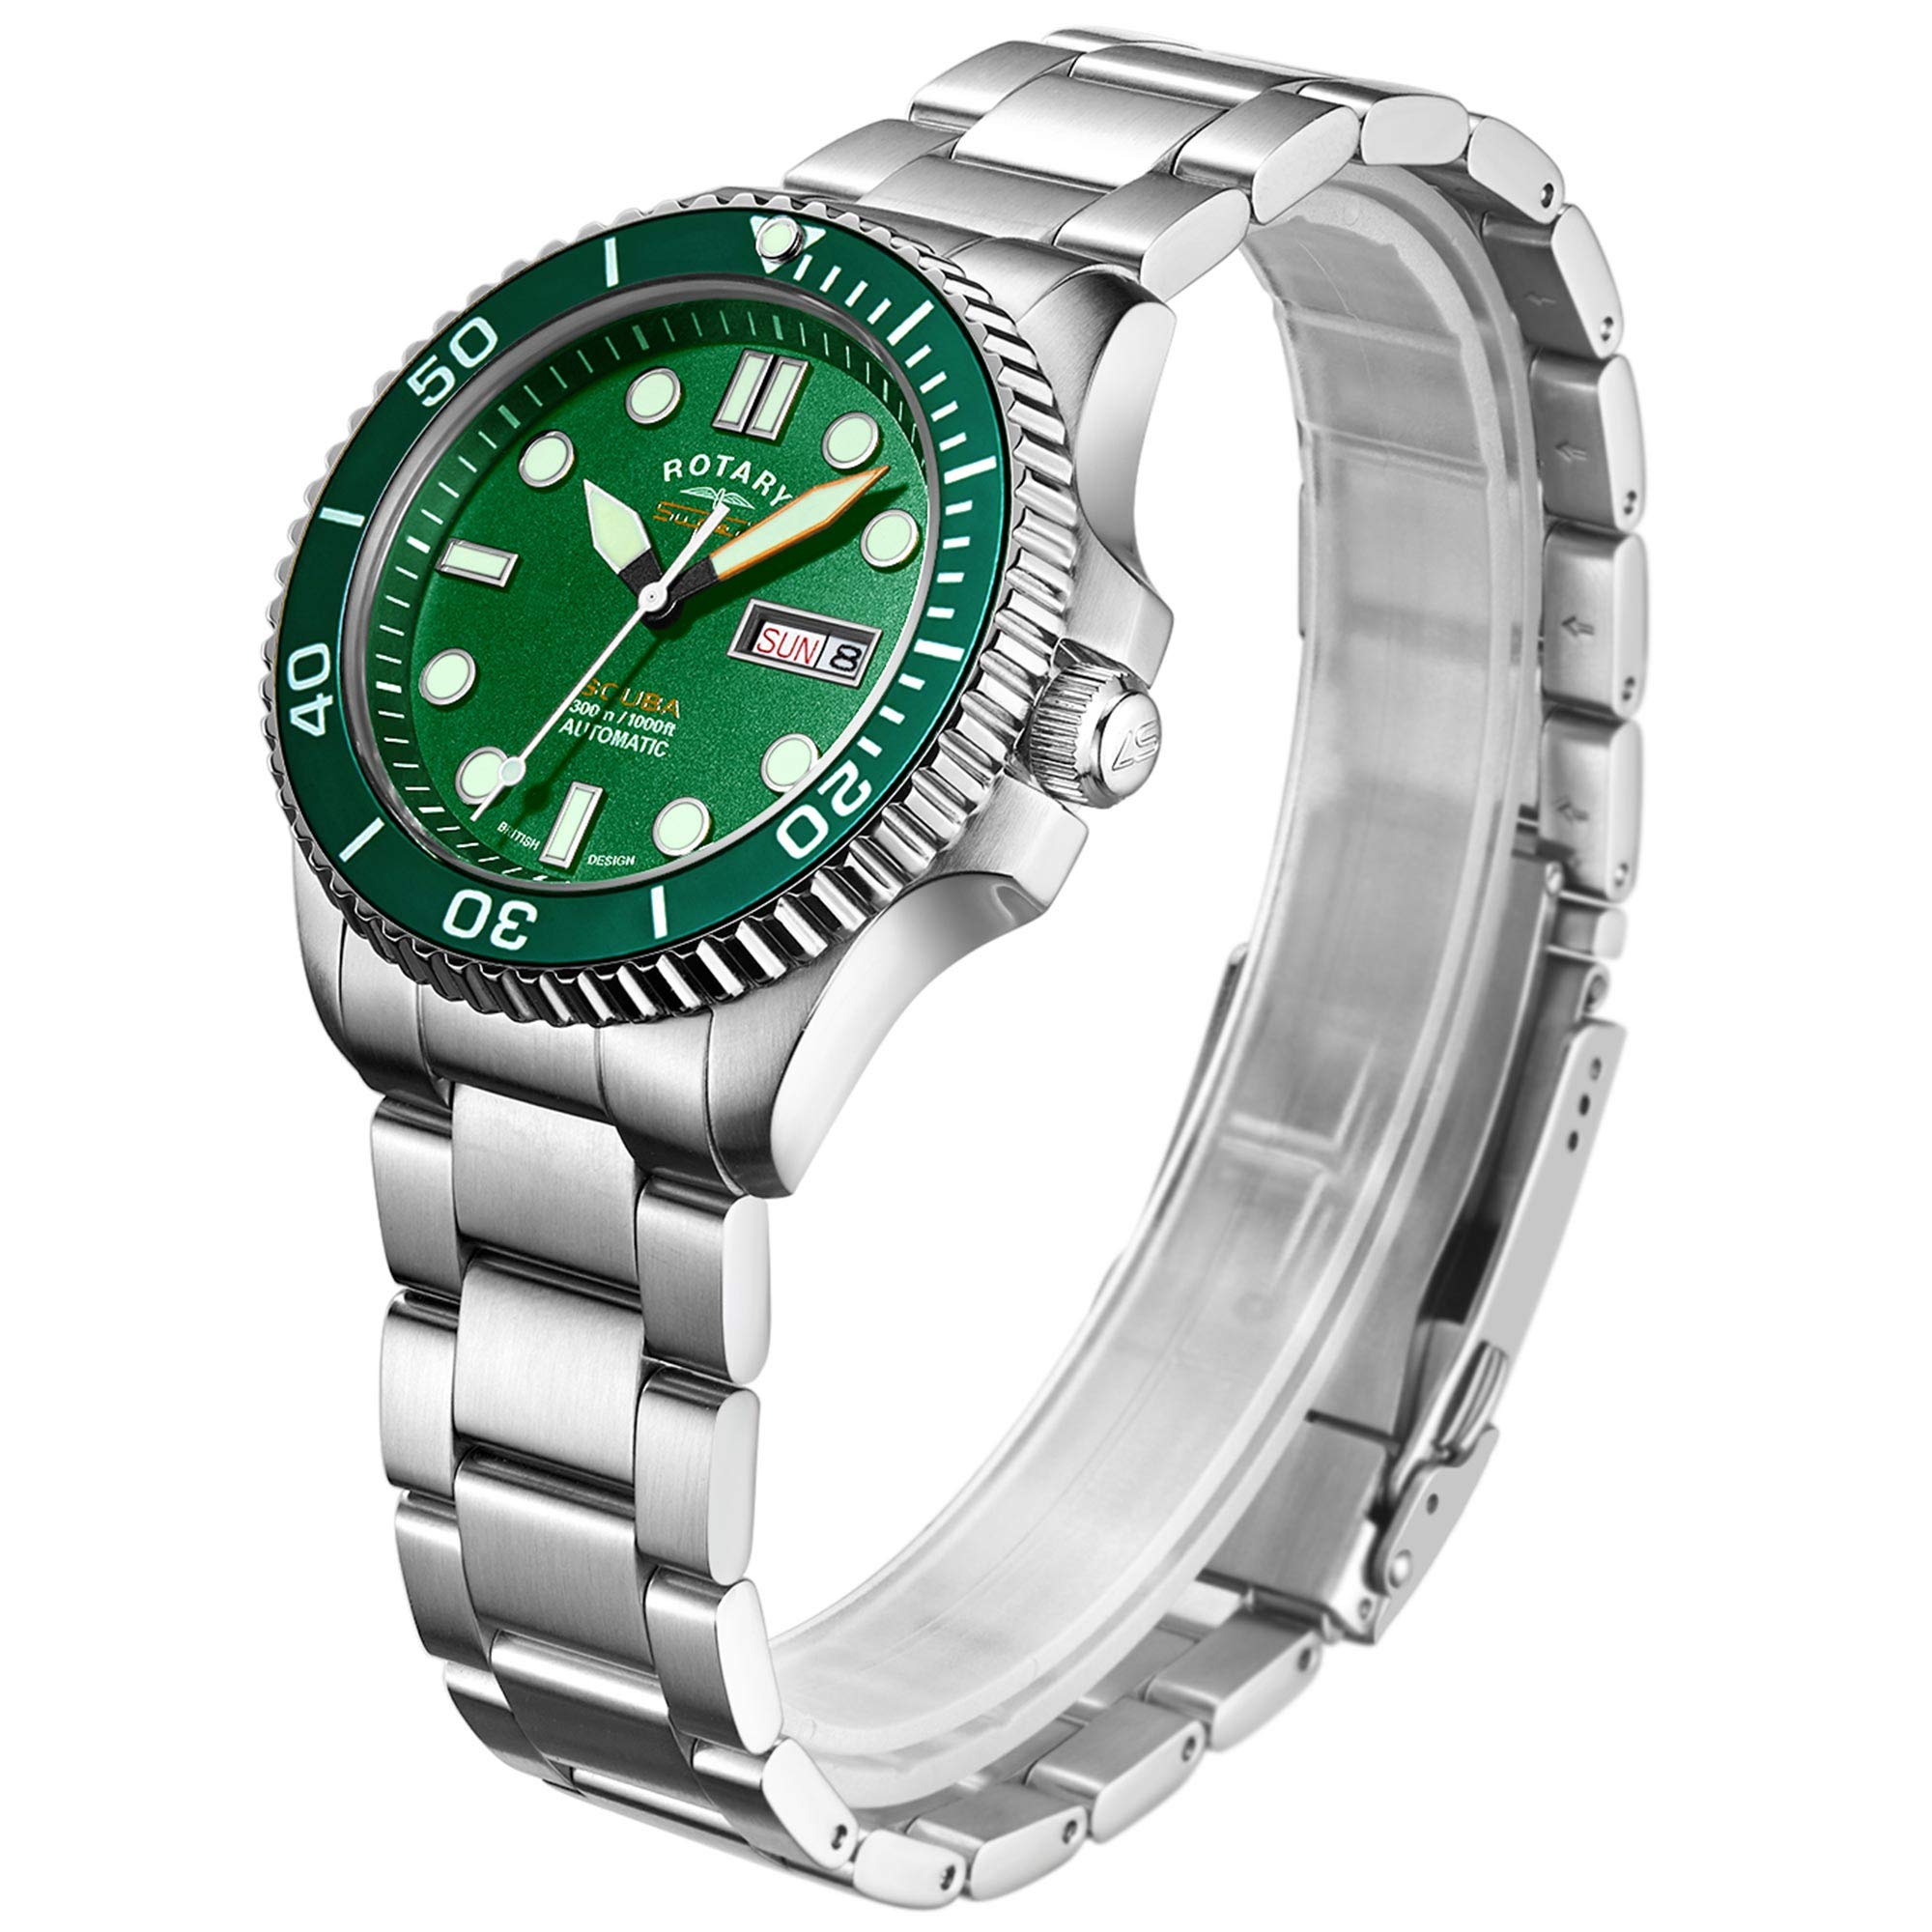 Rotary Super 7 Scuba 'Hulk' Automatic Green Dial Silver Stainless Steel Bracelet Men’s Watch S7S003B